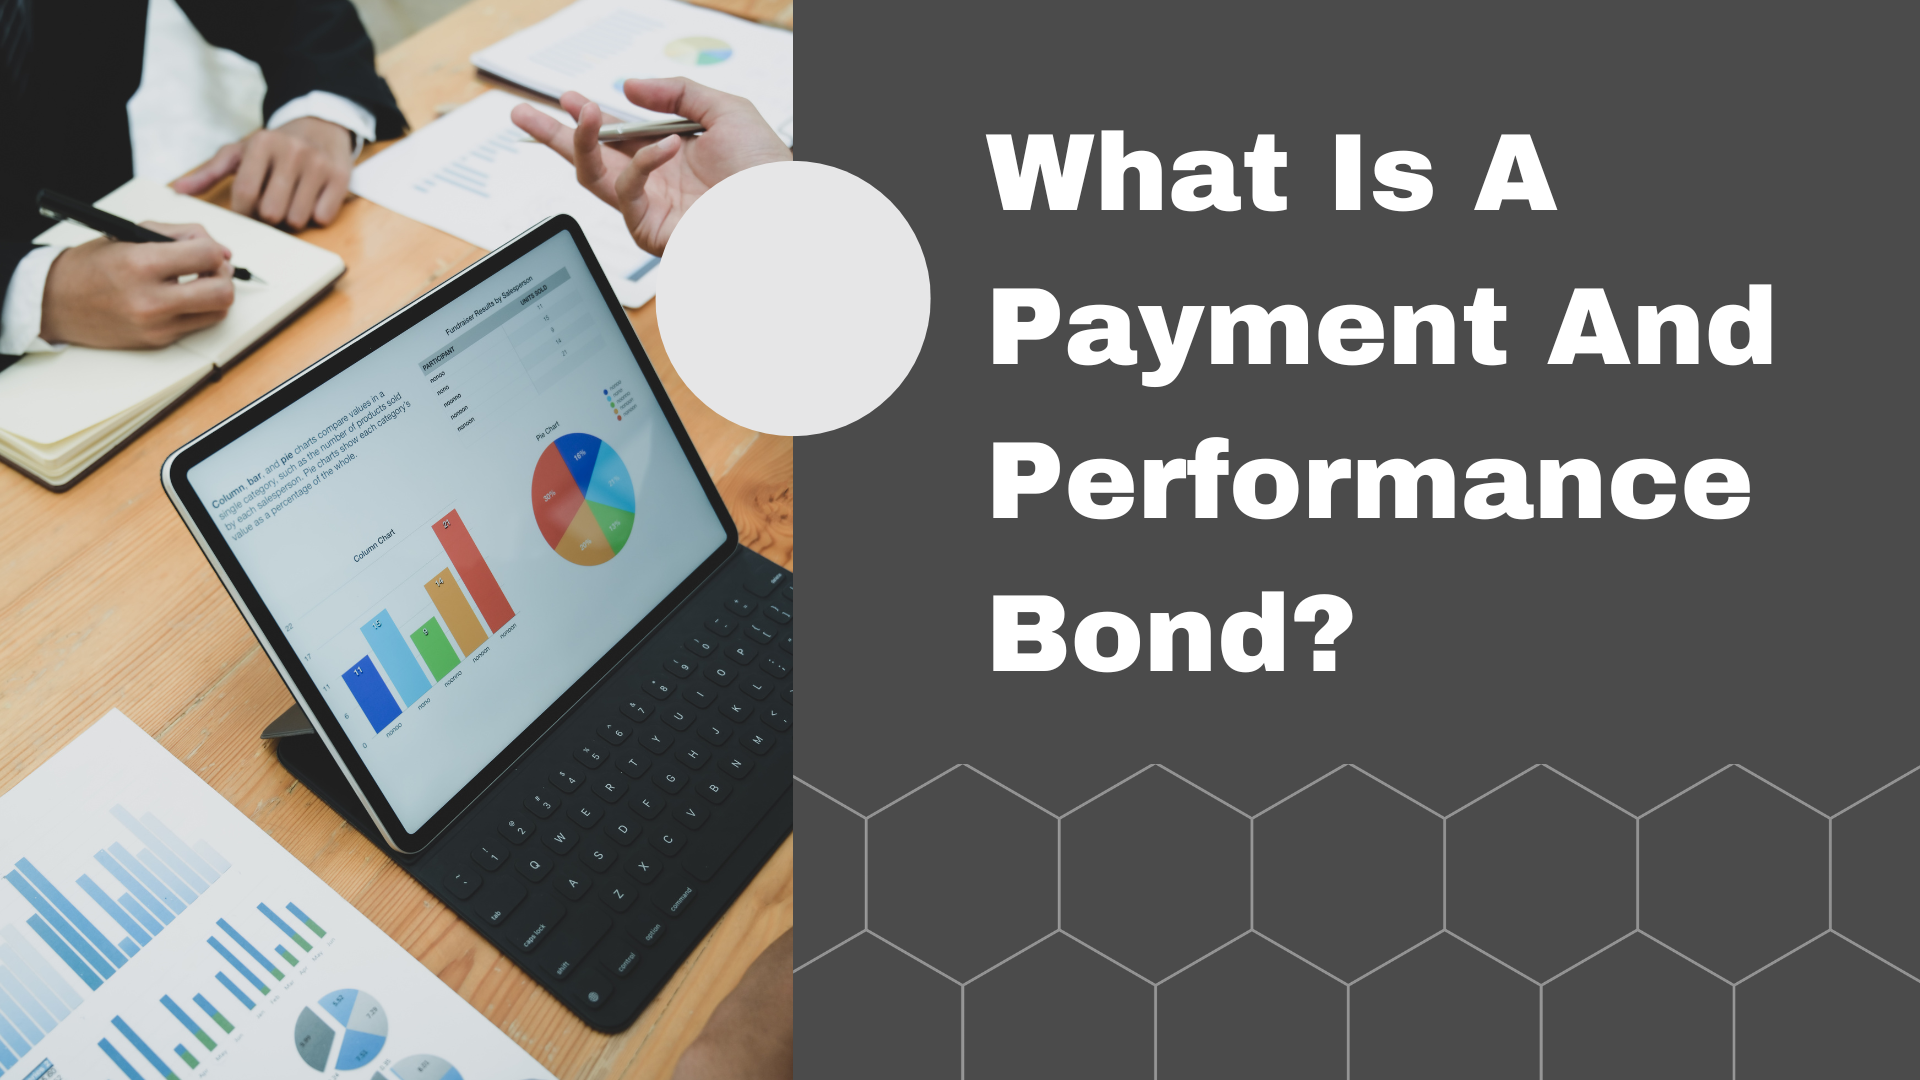 performance bond - What Is A Payment And Performance Bond? - office desk with computer